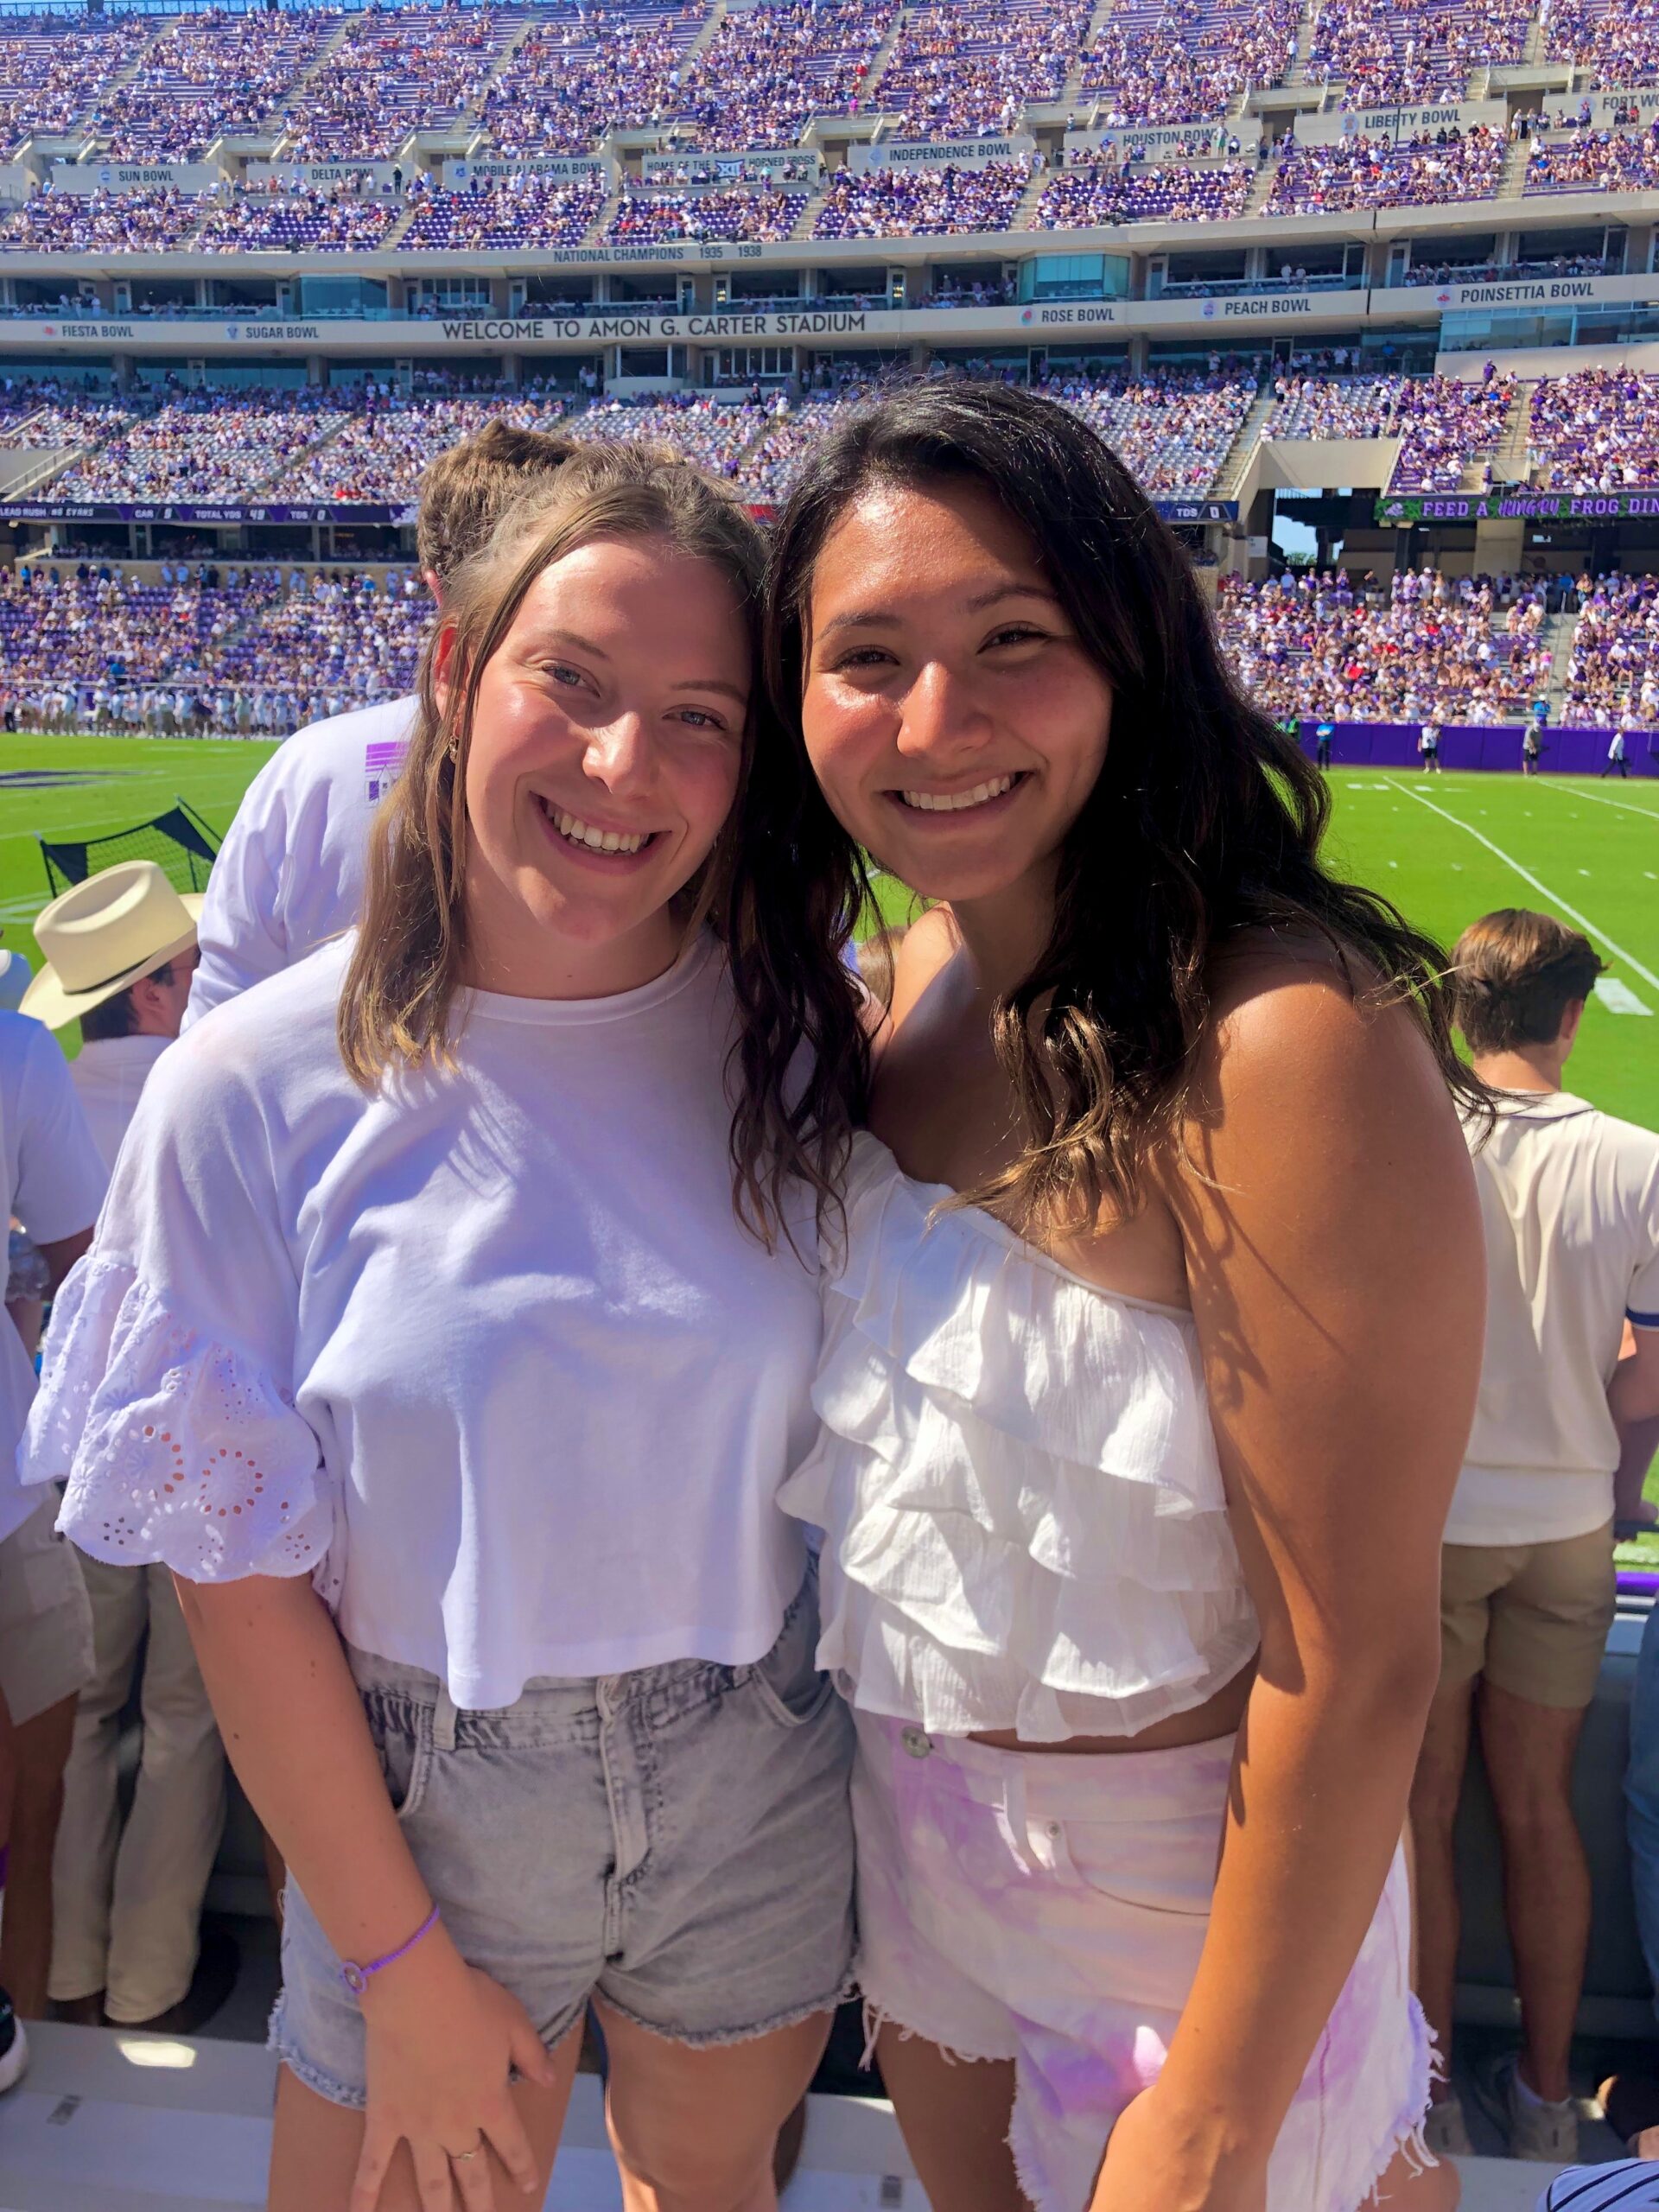 Gracie and her friend at a TCU football game